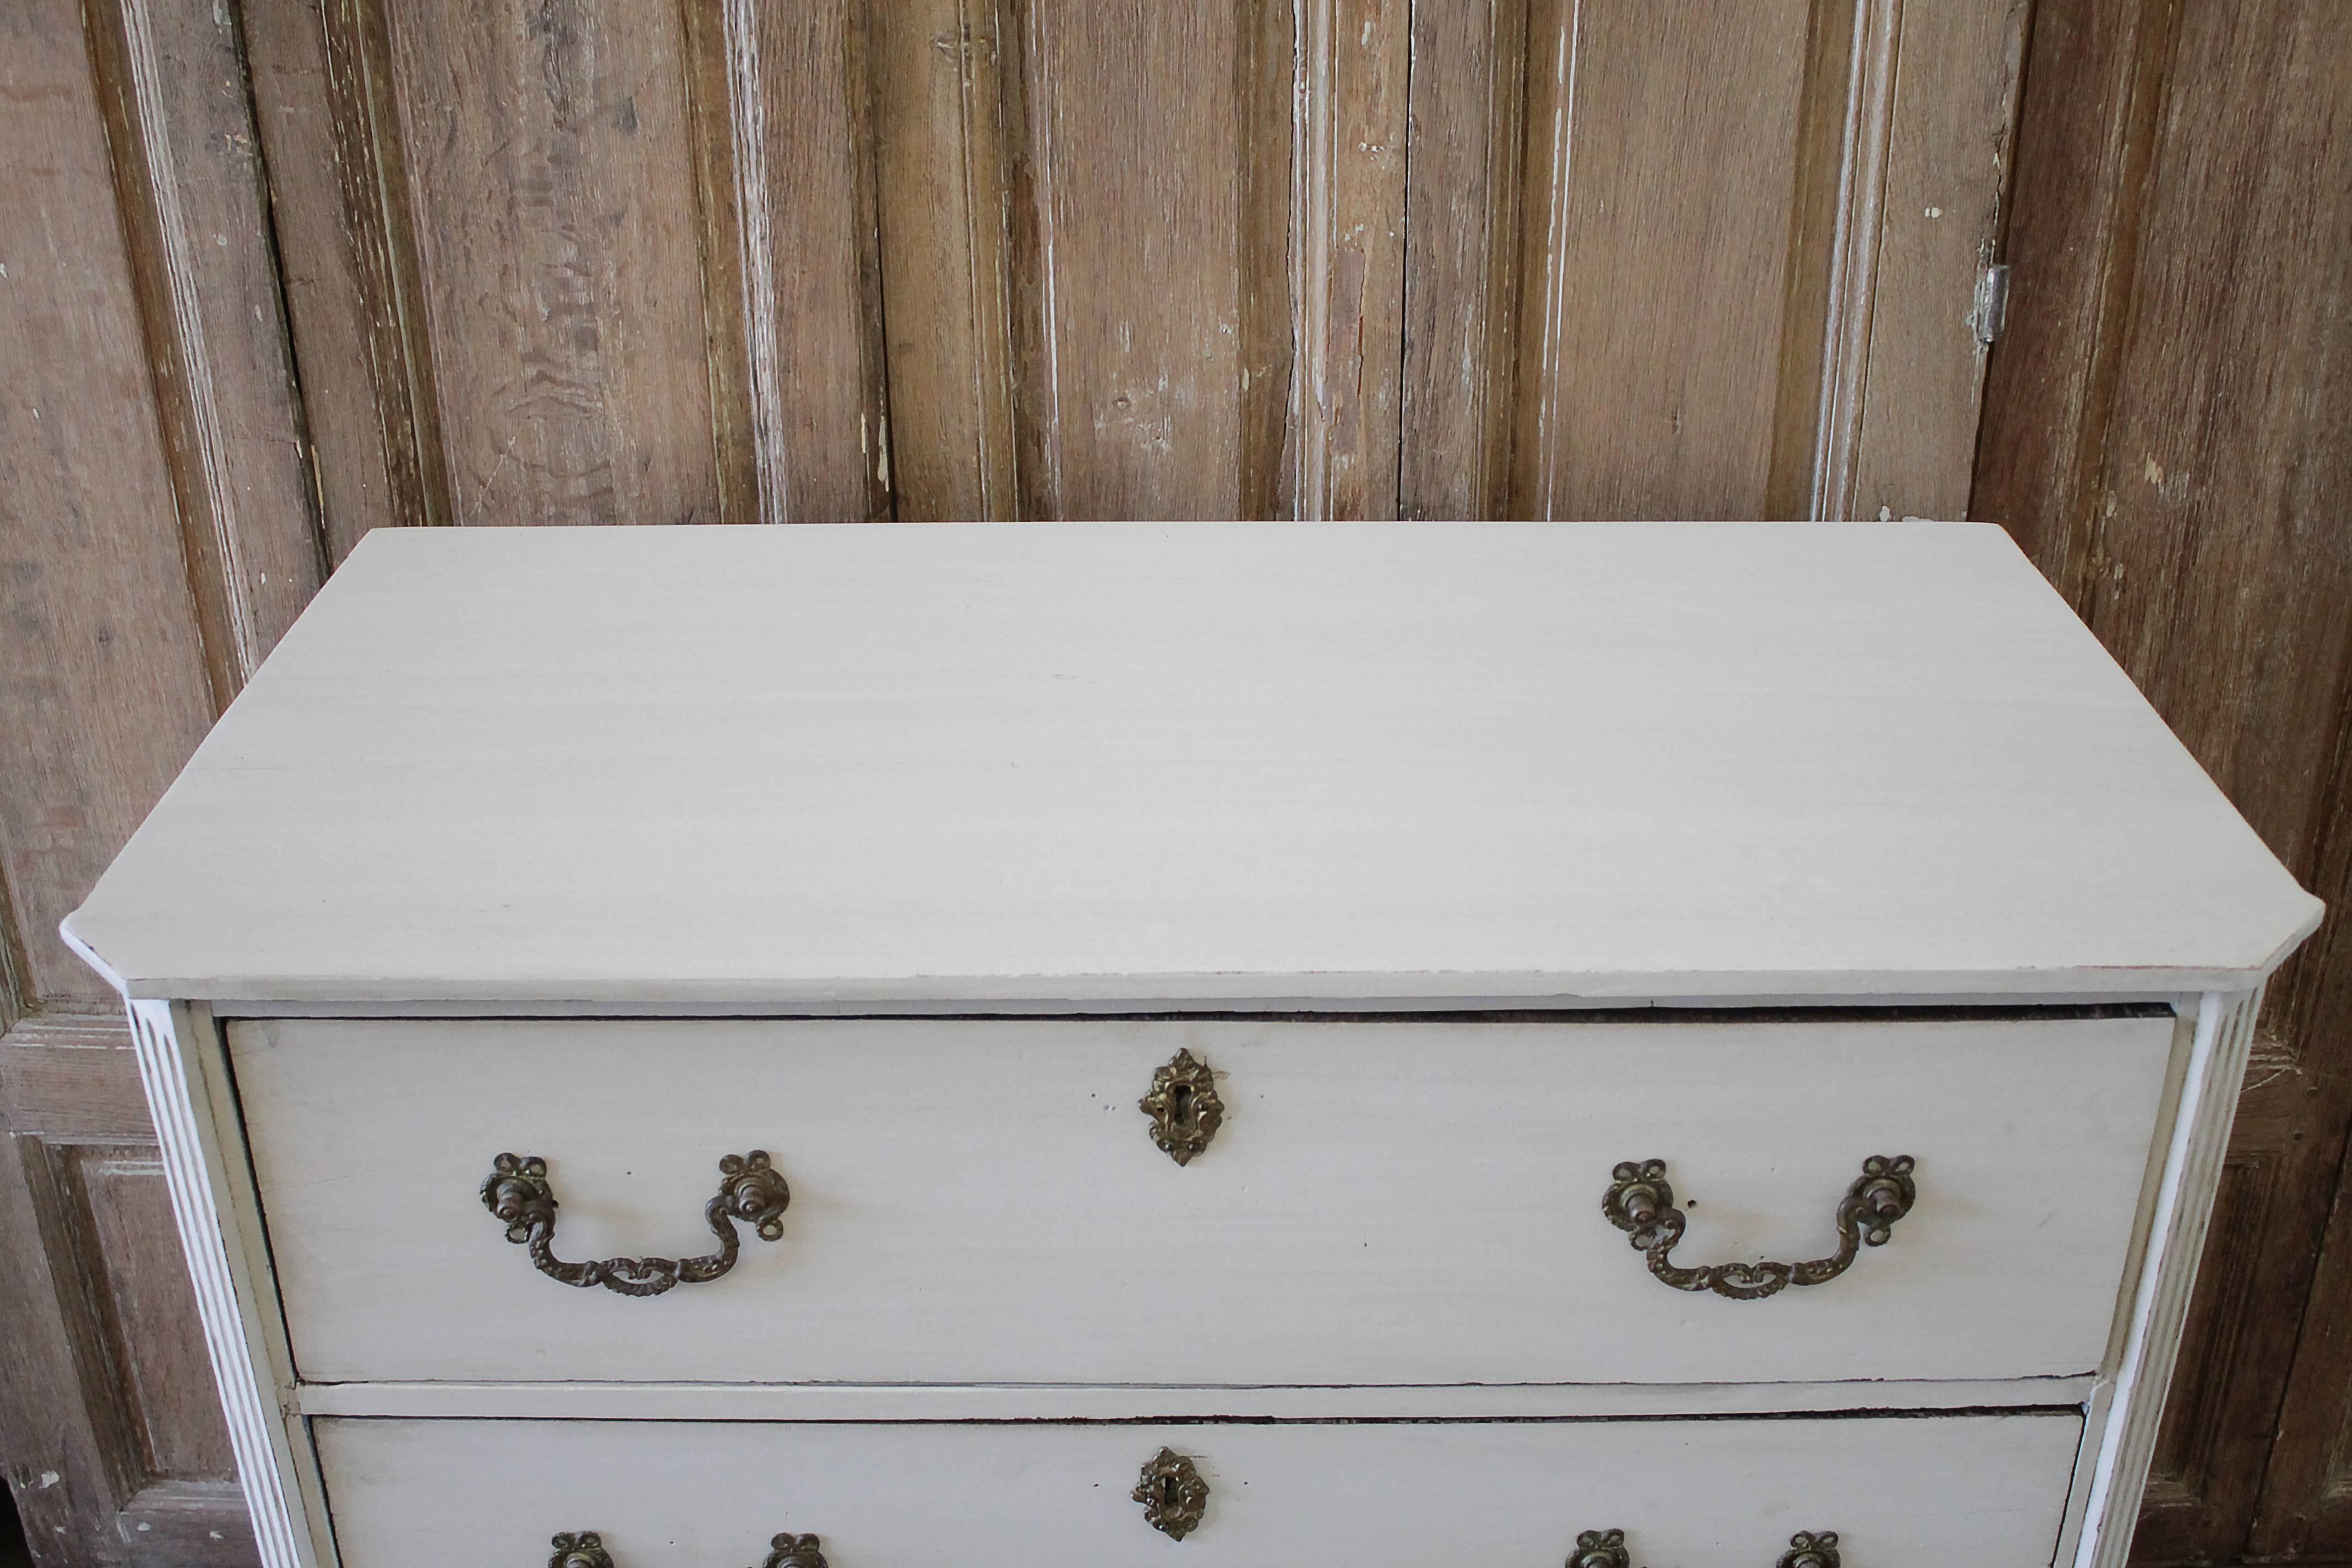 19th century painted Swedish style three-drawer commode
Painted in a pale oyster white finish, with distressed edges, and antique hand glazed patina. Color lends to a soft French grey. Original hardware, drawers open and close with ease. Solid